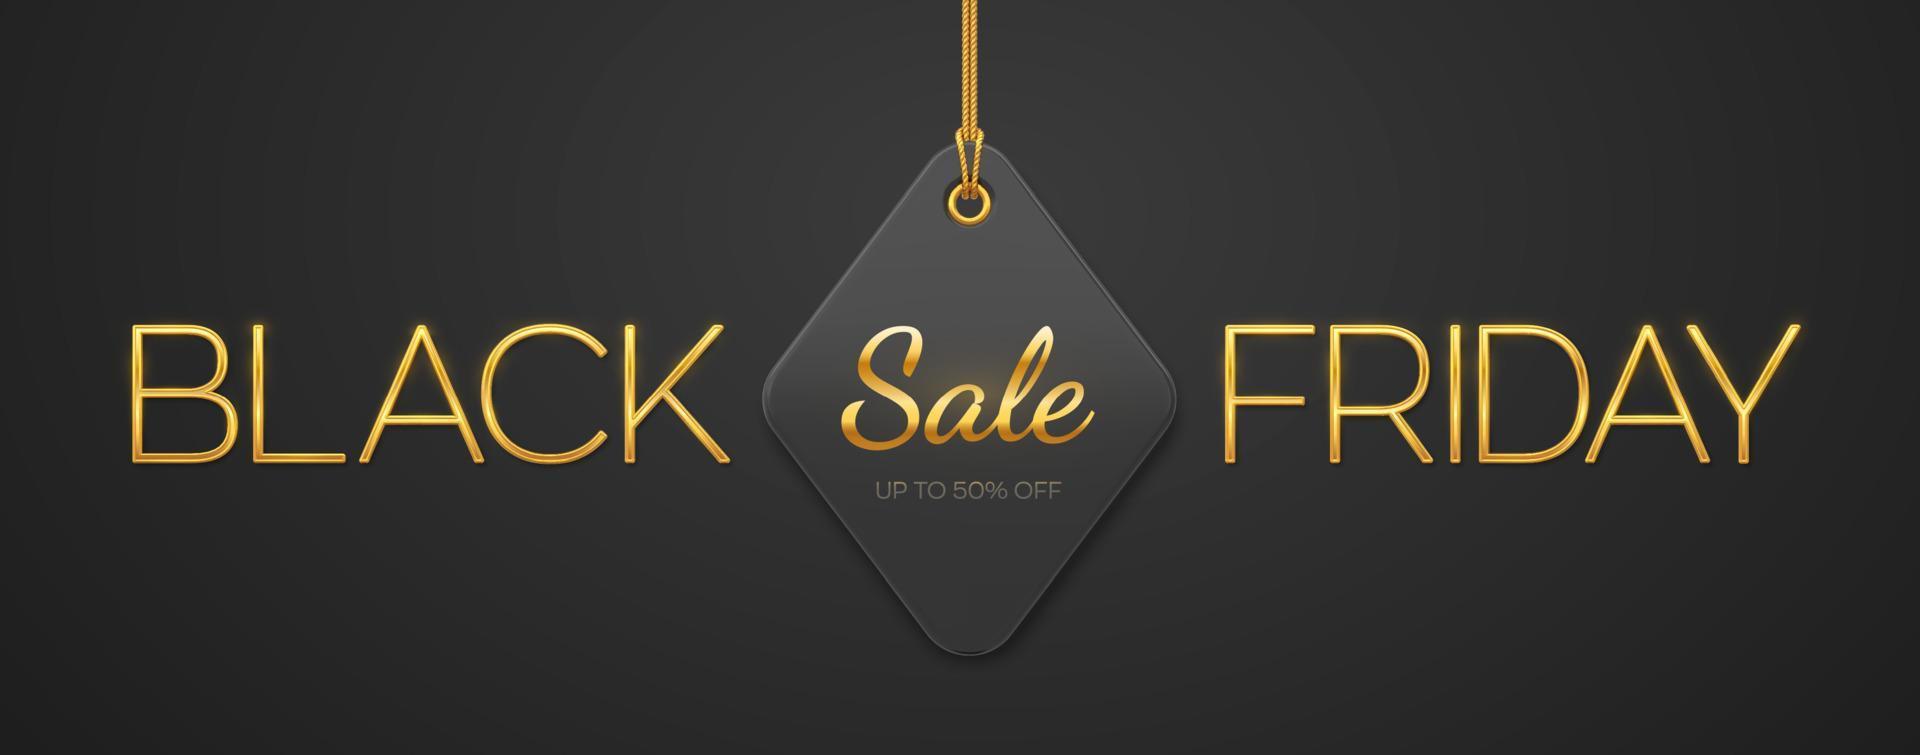 Black Friday Sale. Golden metallic luxury letters BLACK FRIDAY and price tag coupon hanging on gold ropes on black background. Horizontal banner, web site header, poster. Vector illustration.